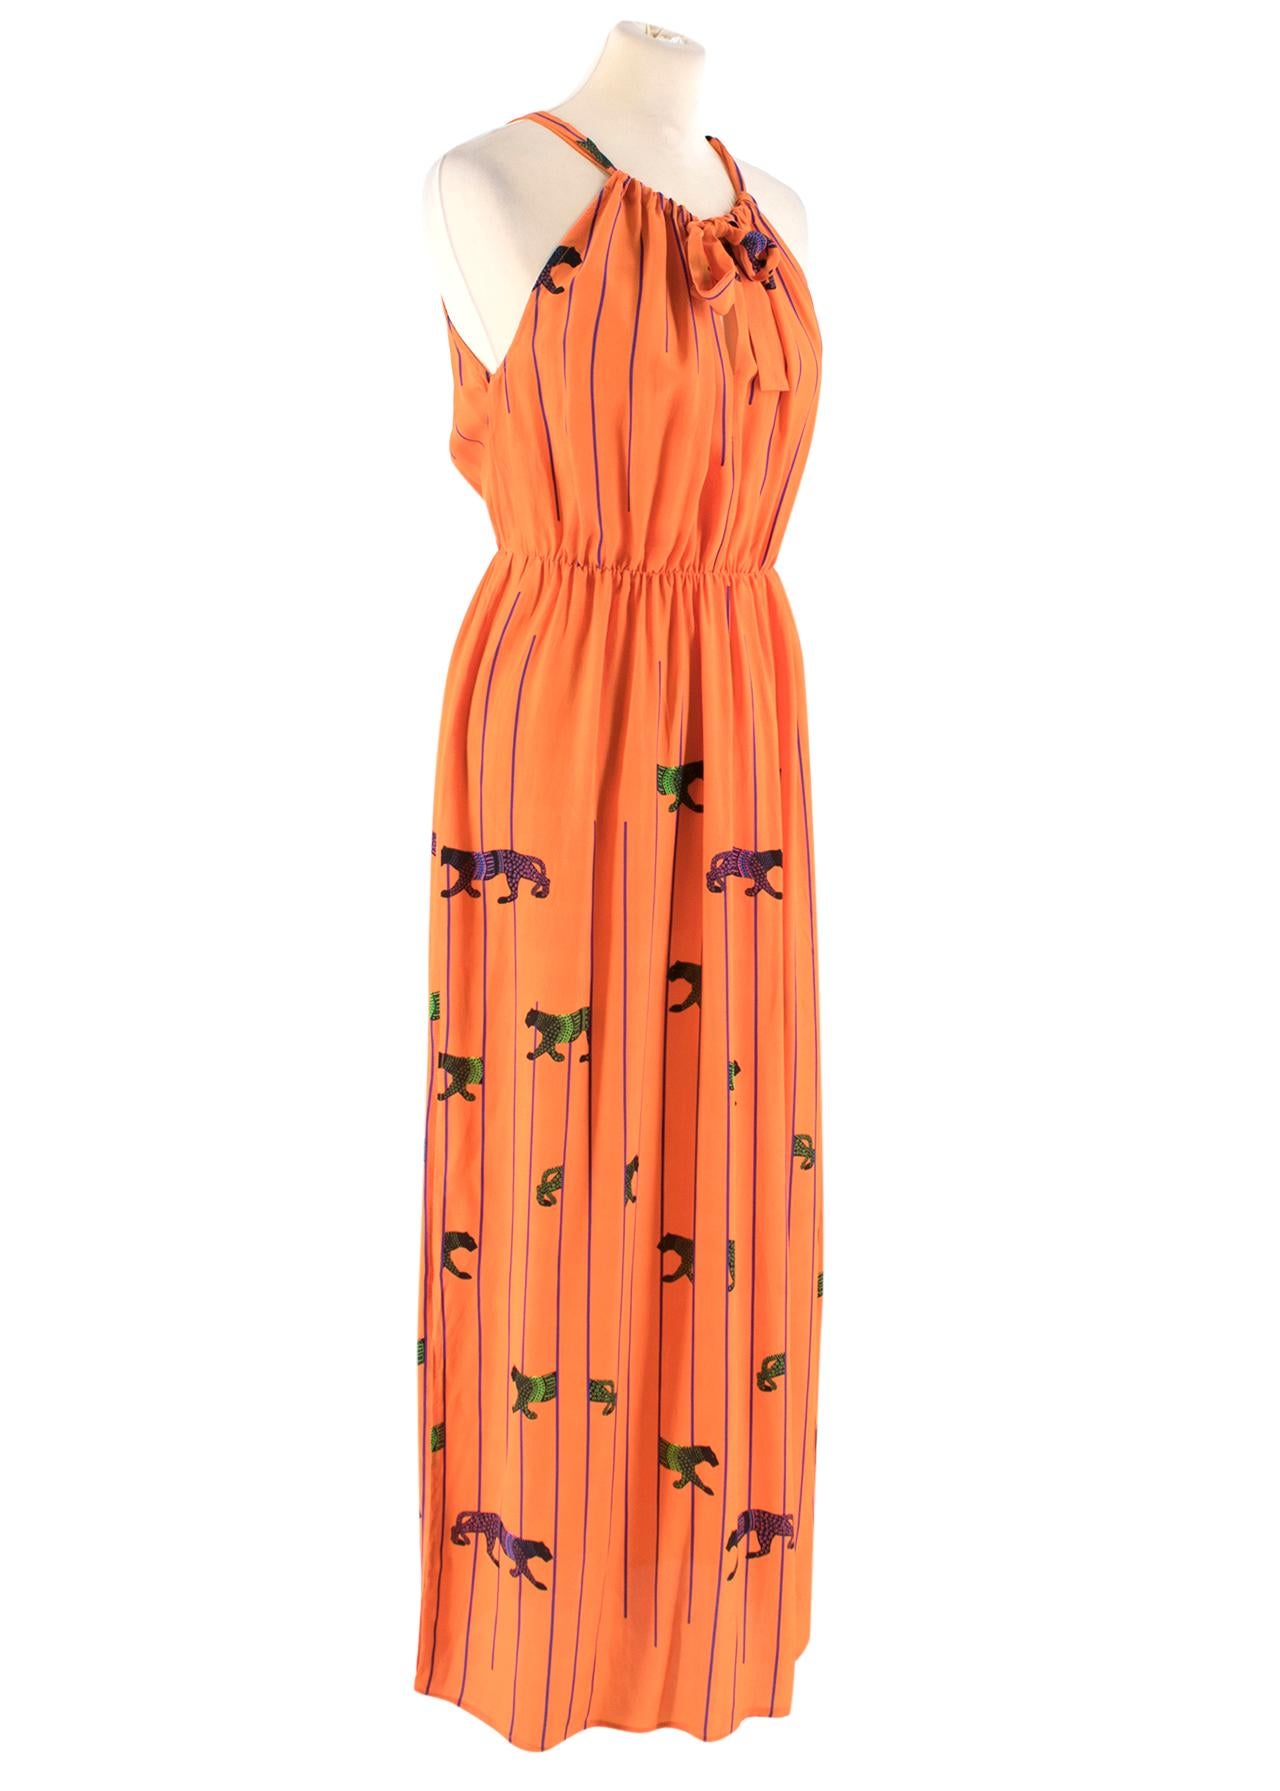 MSGM Orange Striped Tiger Print Long Silk Dress

- Orange, lightweight, striped and tiger print long silk dress
- Elasticated waist
- Self-tie drawstring neckline 
- Slim shoulder straps

Please note, these items are pre-owned and may show some